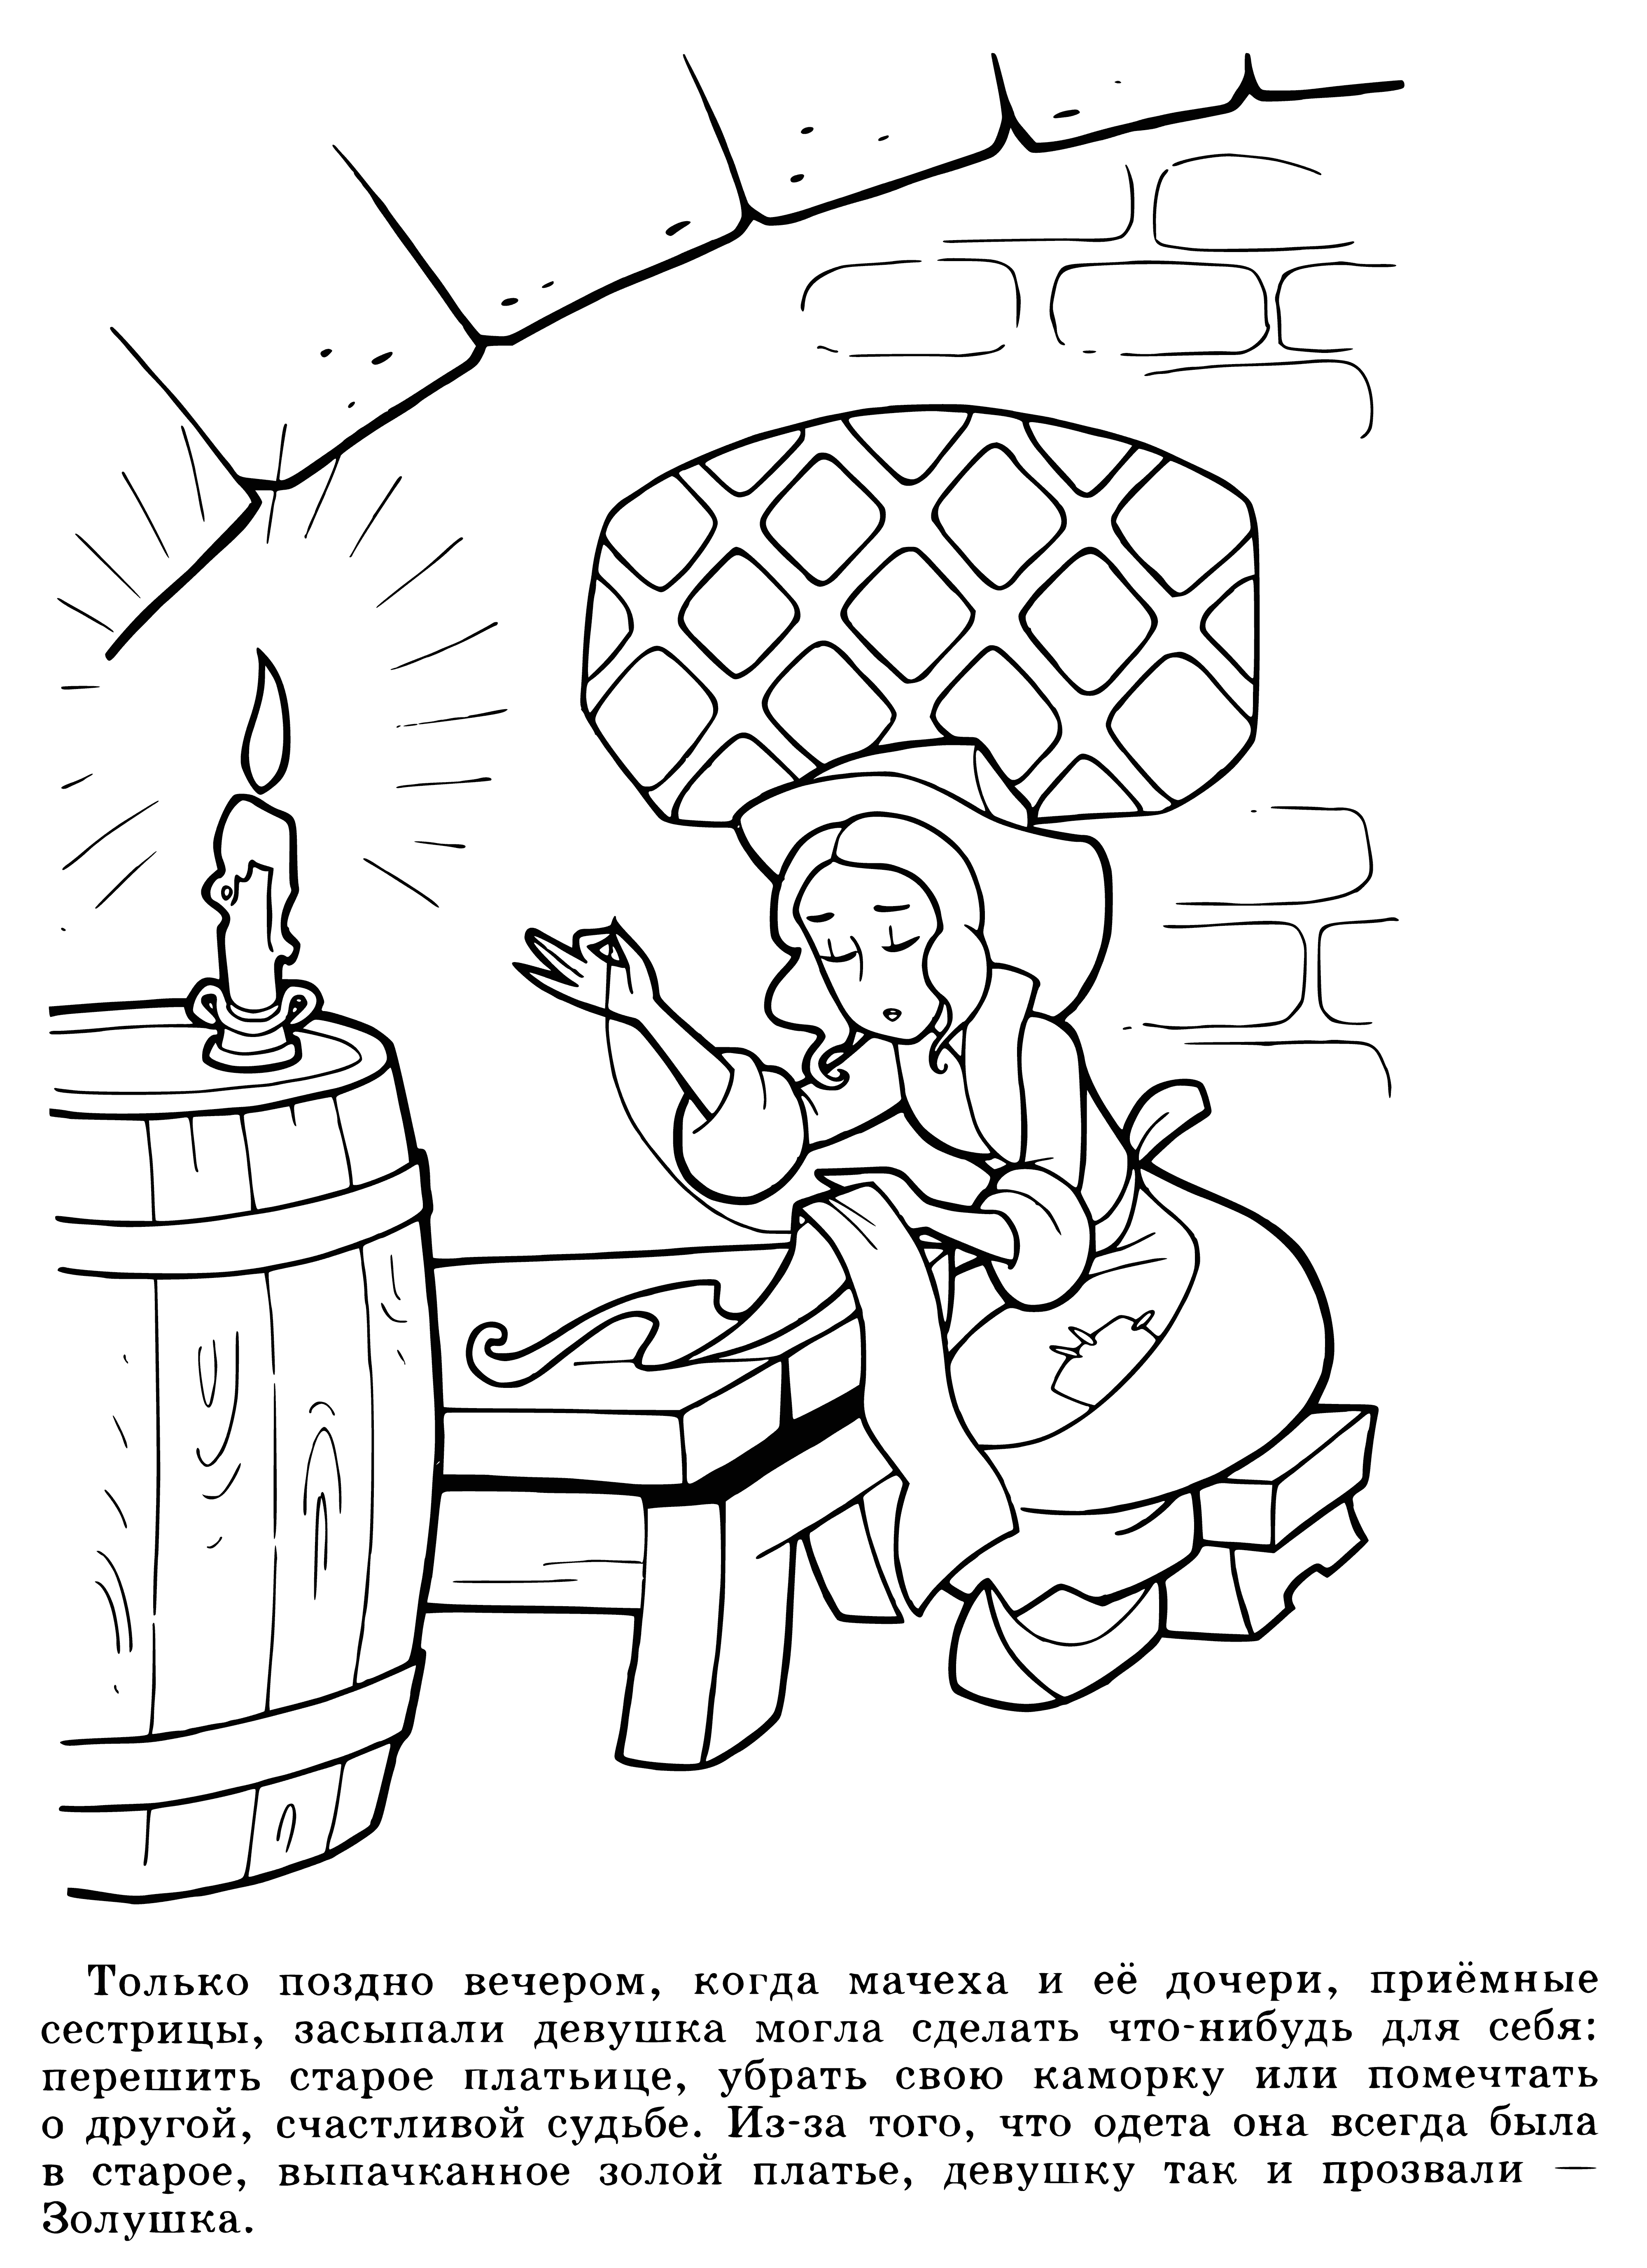 coloring page: Cinderella is a French fairy tale of kindness, hope and a magical makeover, leading to a happy ending with her beloved prince.